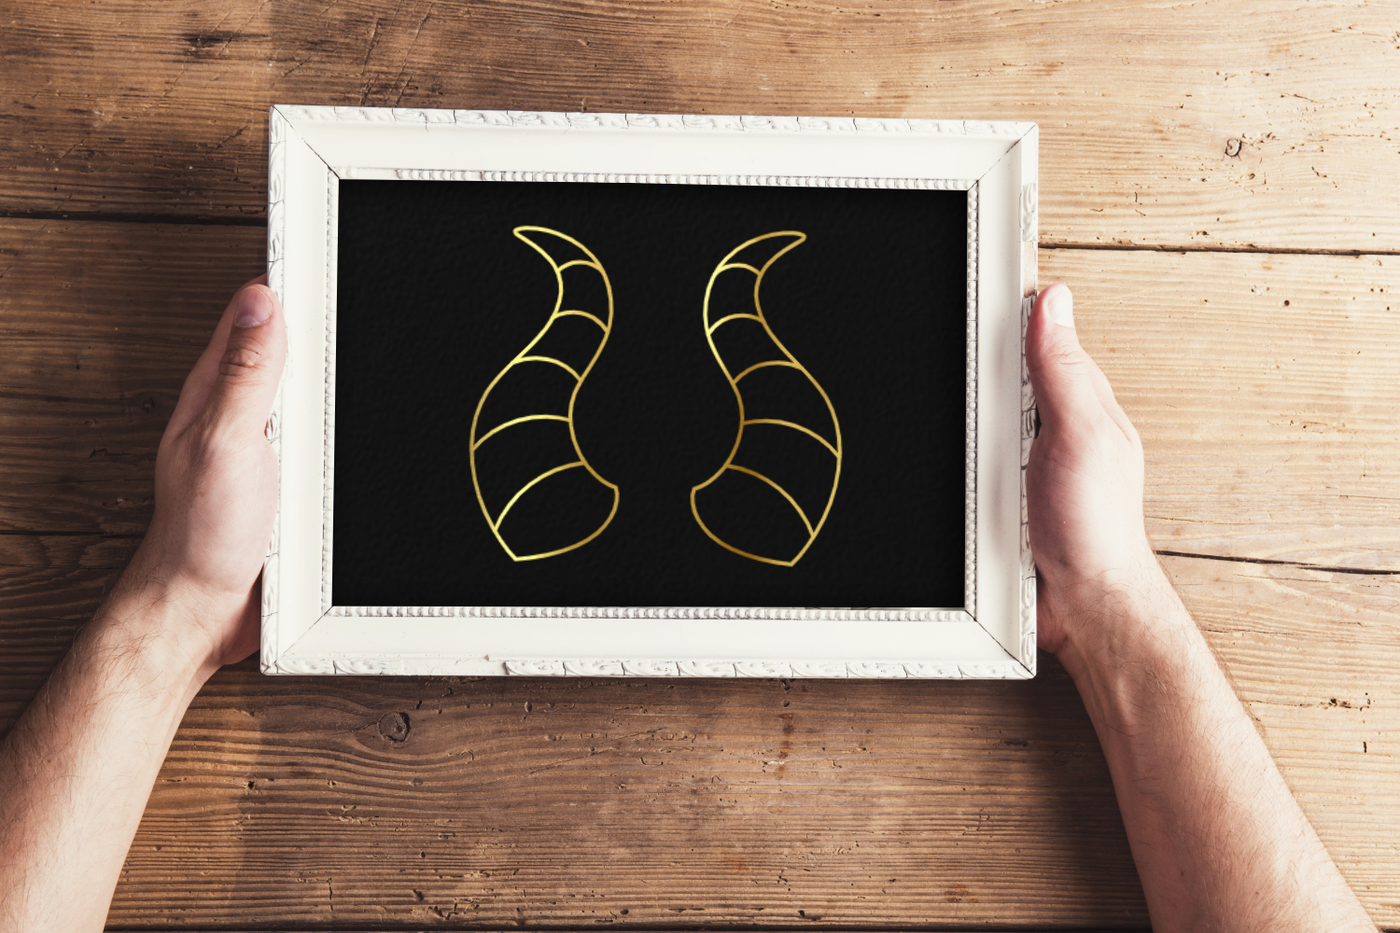 White hands holding a framed image. The image is a gold line drawing of dragon horns on a black background.